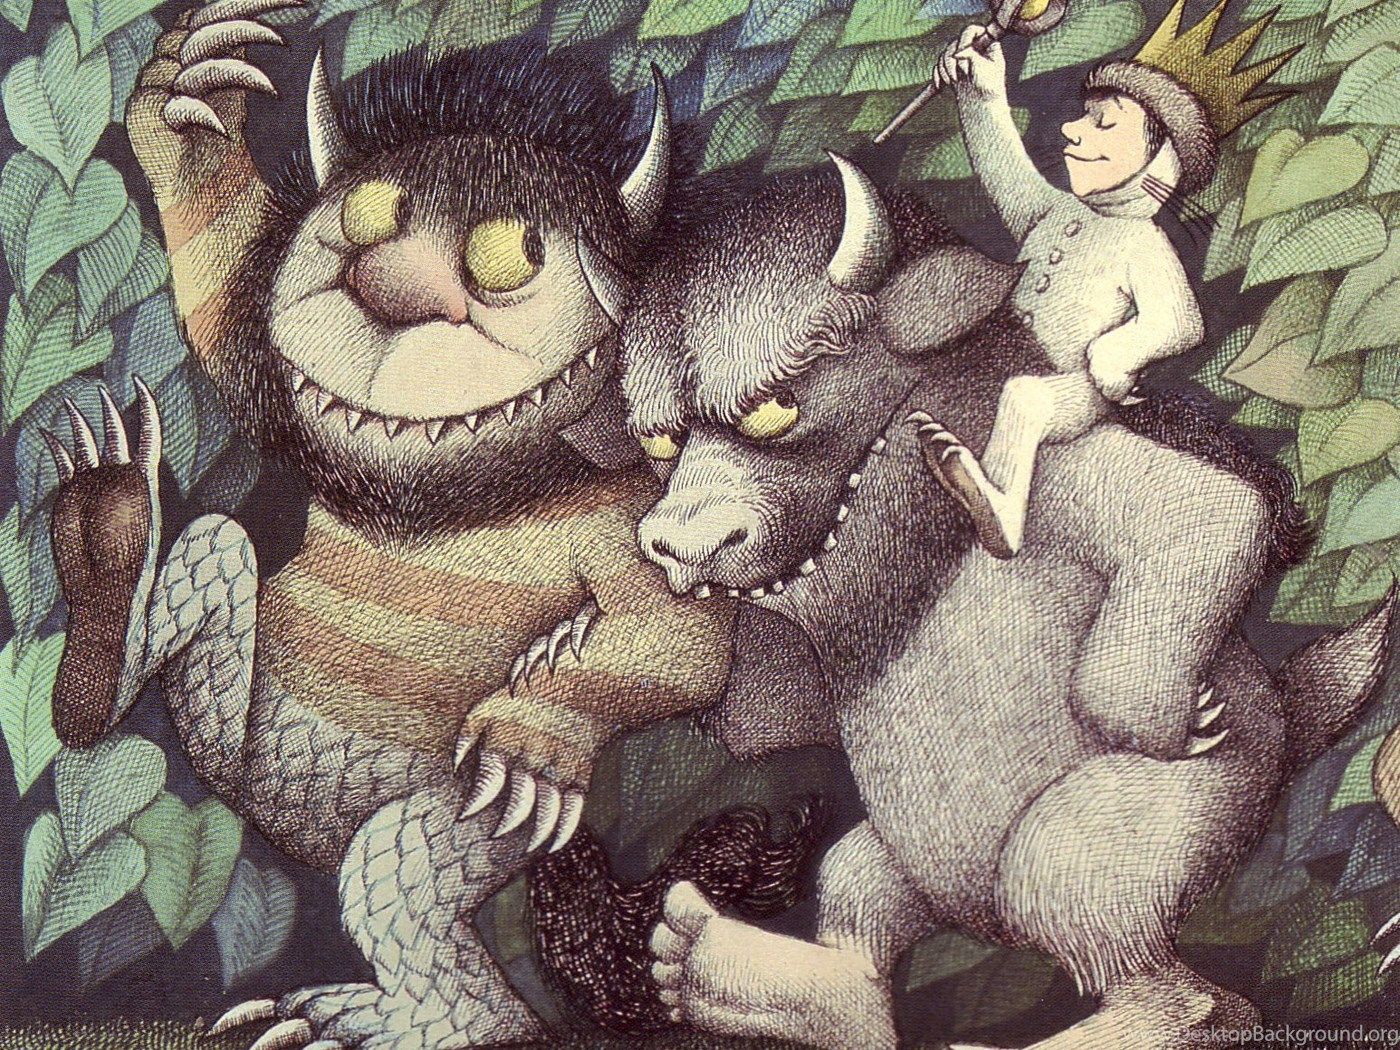 Where The Wild Things Are Movie HD Wallpapers  Where The Wild Things Are  HD Movie Wallpapers Free Download 1080p to 2K  FilmiBeat